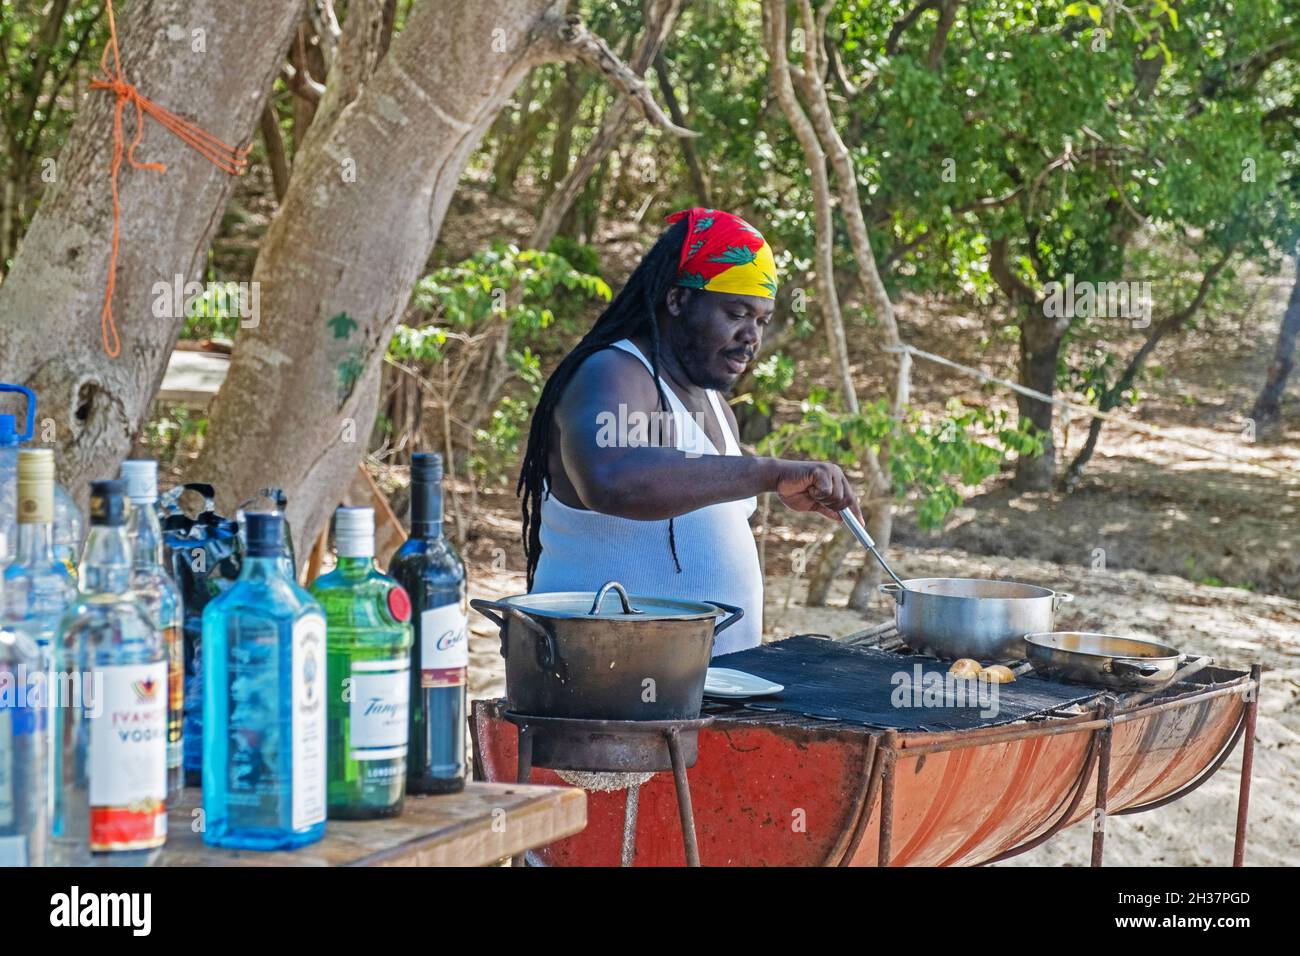 Rastafari cooking meal on barbecue at beach bar at Anse La Roche on Carriacou, island of the Grenadine Islands, Grenada in the Caribbean Sea Stock Photo